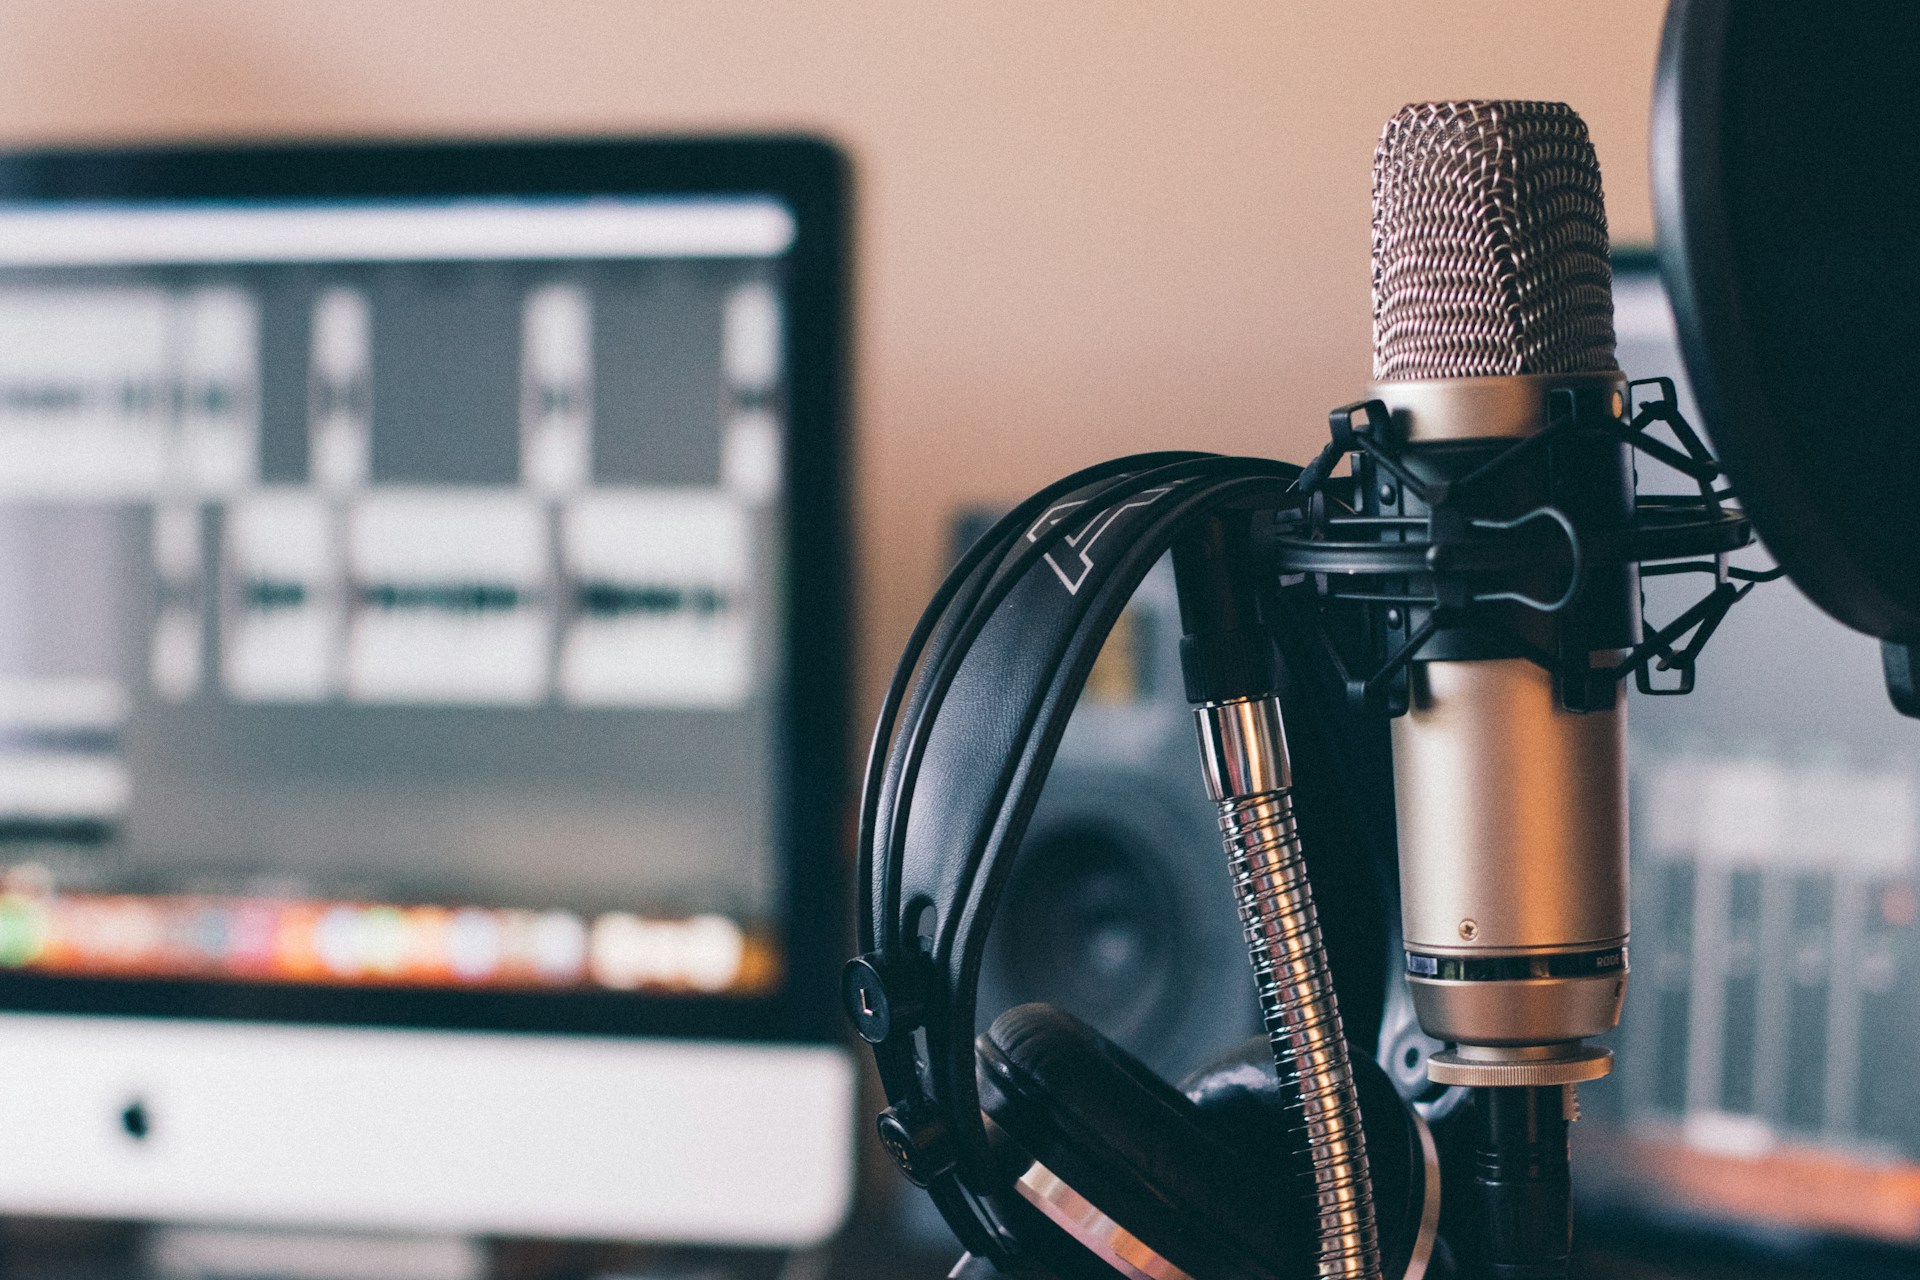 Did you know Apple’s Podcasts app now includes written transcripts? Our tip helps you view the text while you listen, use it to navigate within the audio, search for specific bits, and more. | CreativeTechs.com